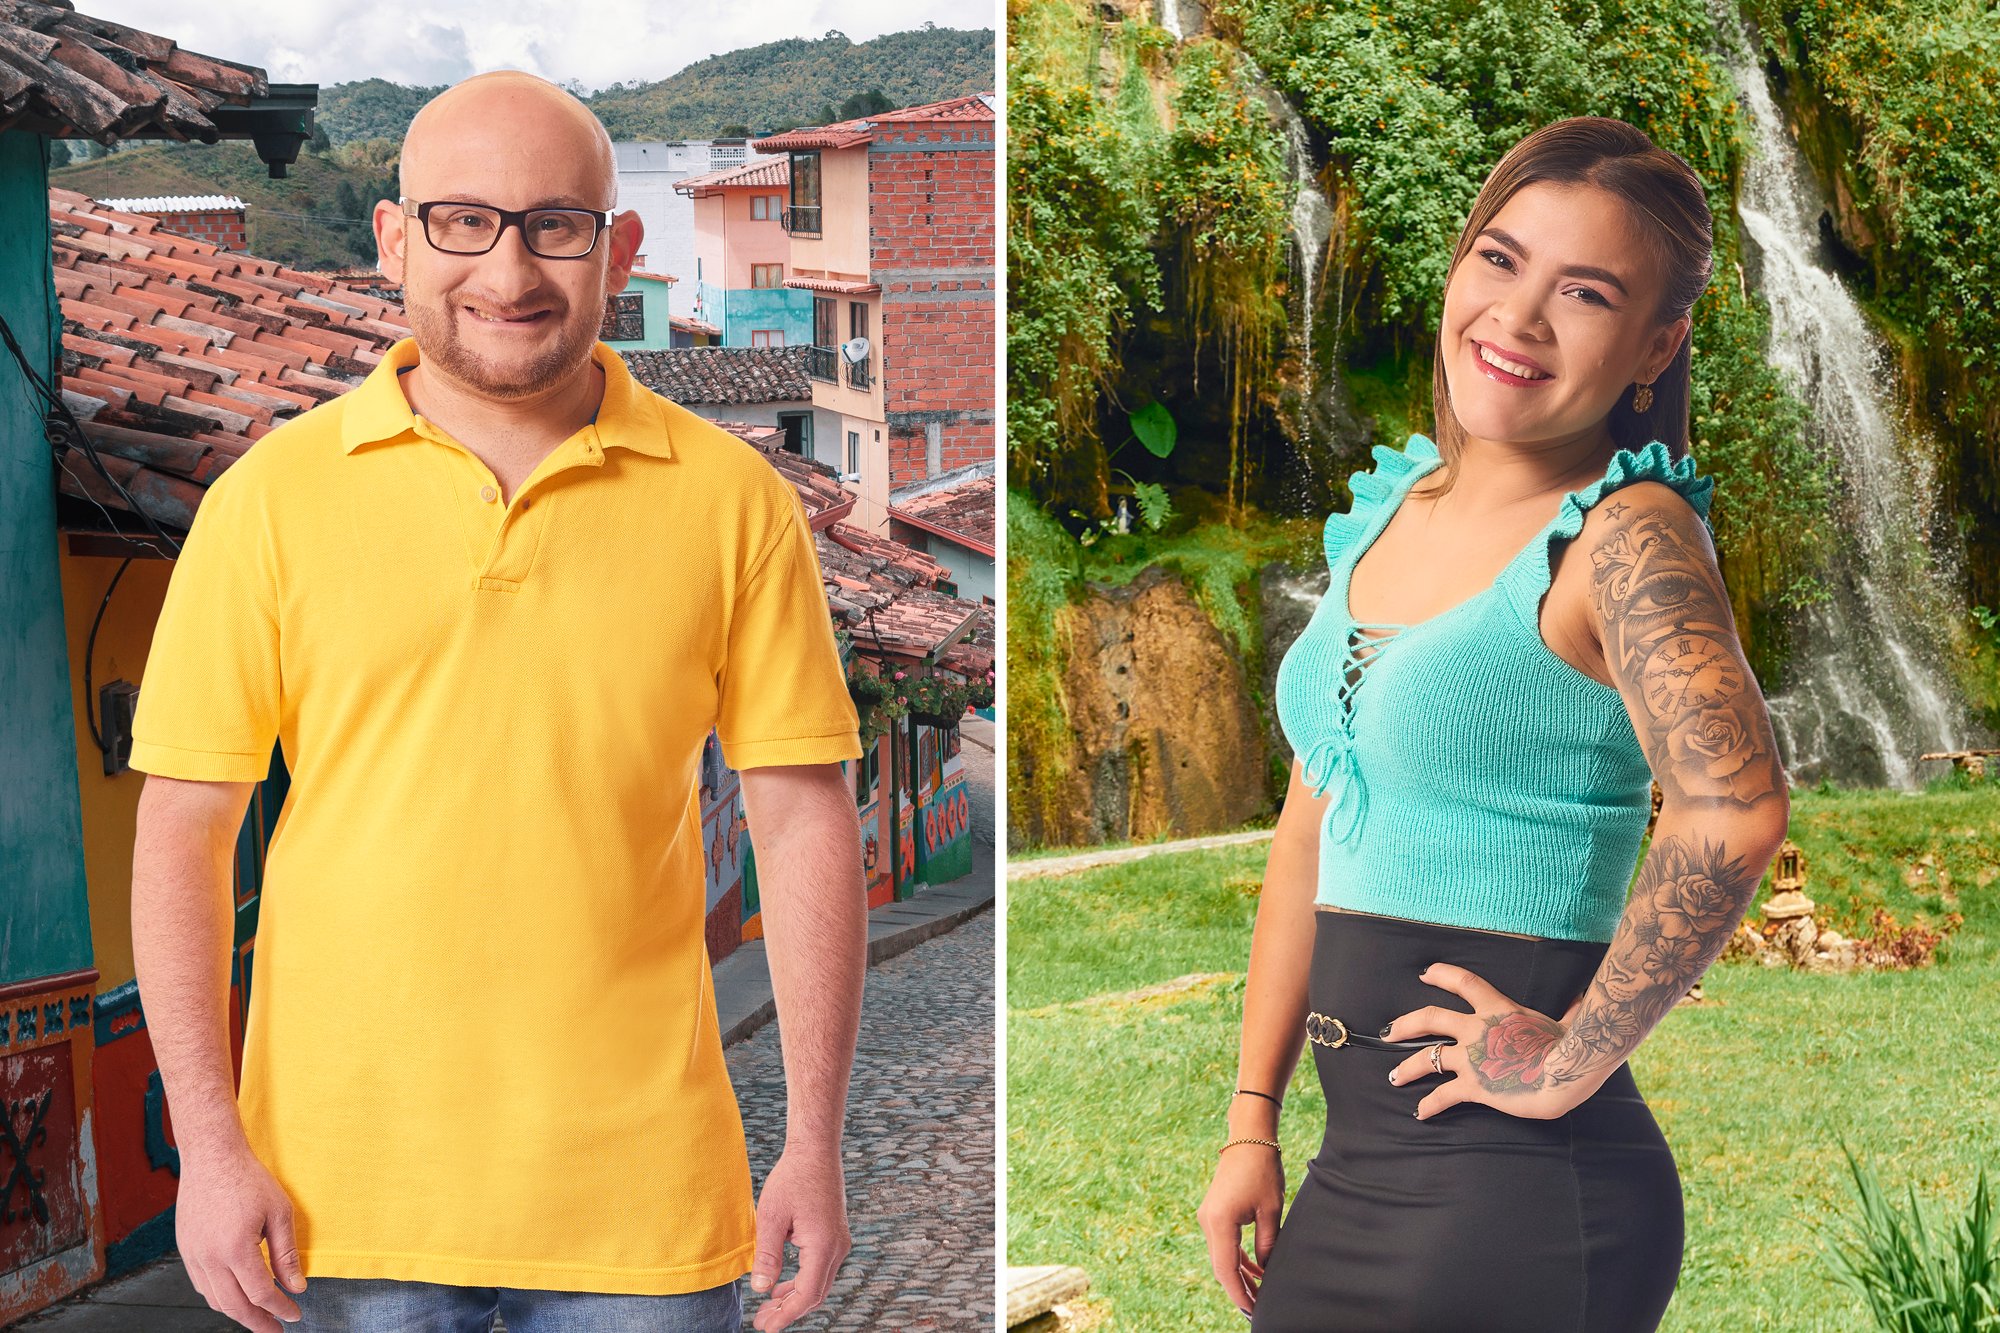 '90 Day Fiancé: Before the 90 Days' Season 5 couple Mike and Ximena seen here with Mike wearing a yellow polo while Ximena wears a turquoise tank top.